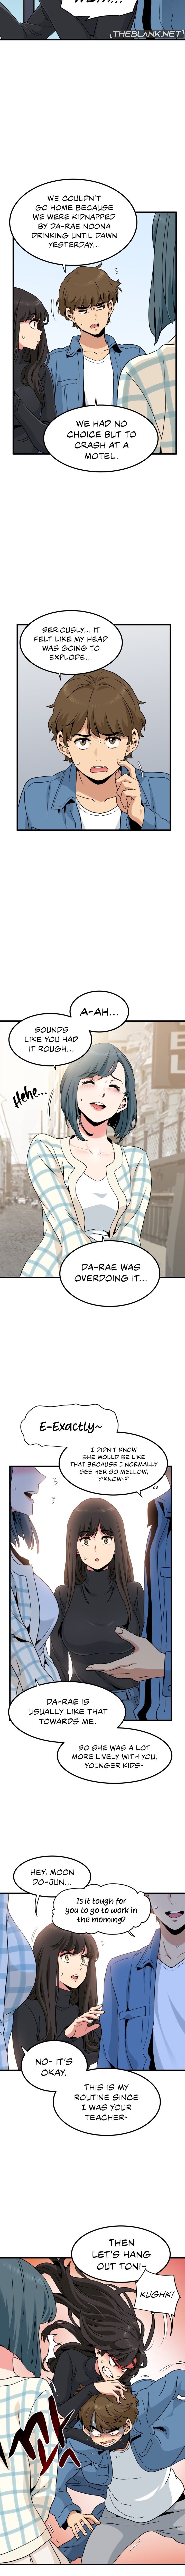 a-turning-point-chap-25-1